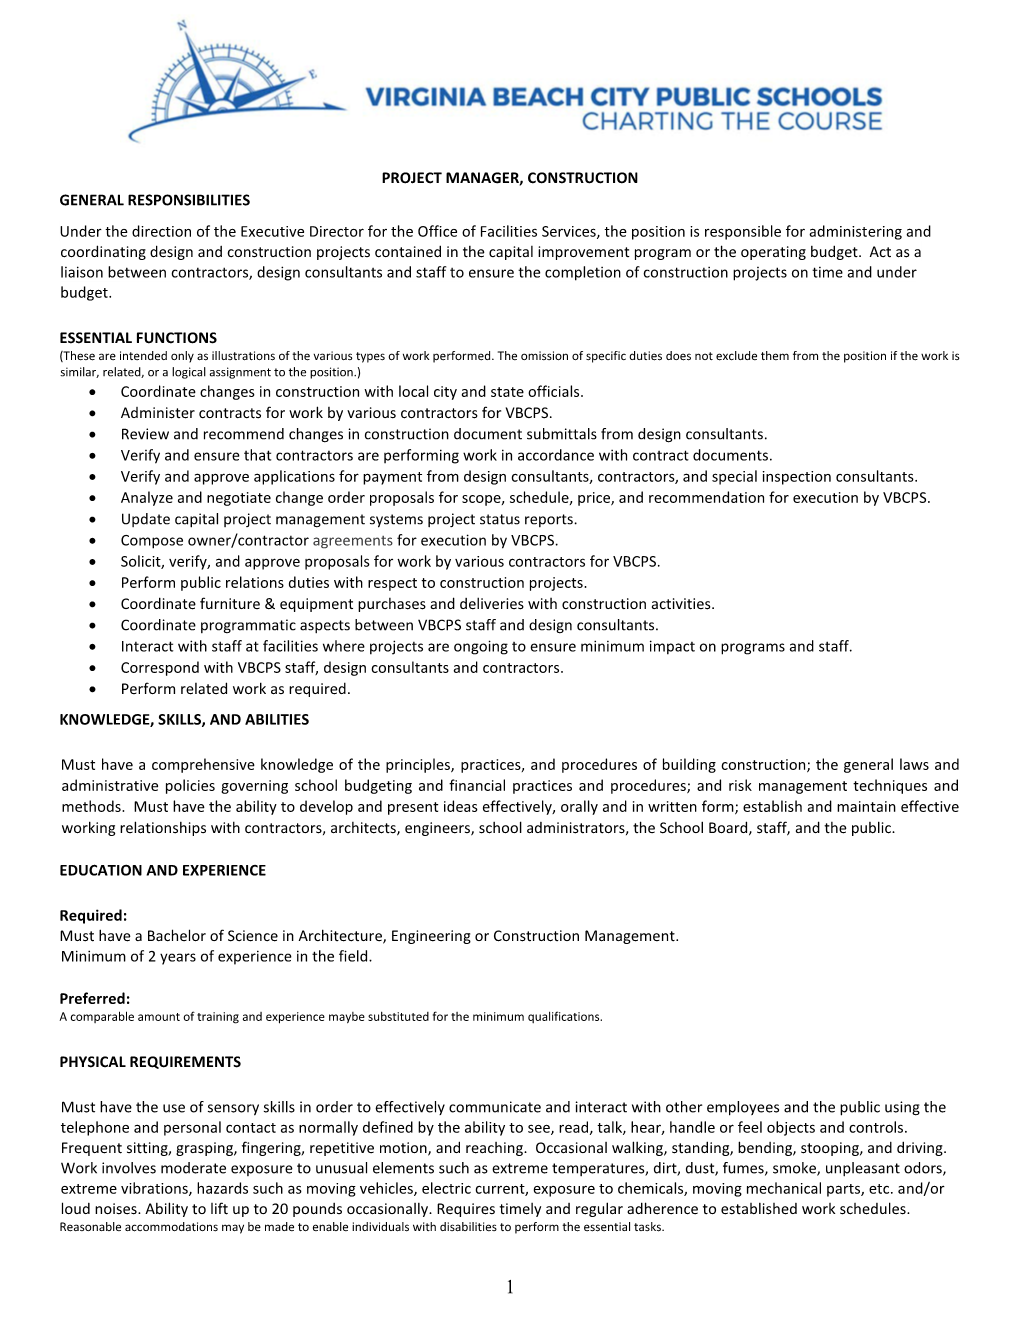 Project Manager, Construction General Responsibilities